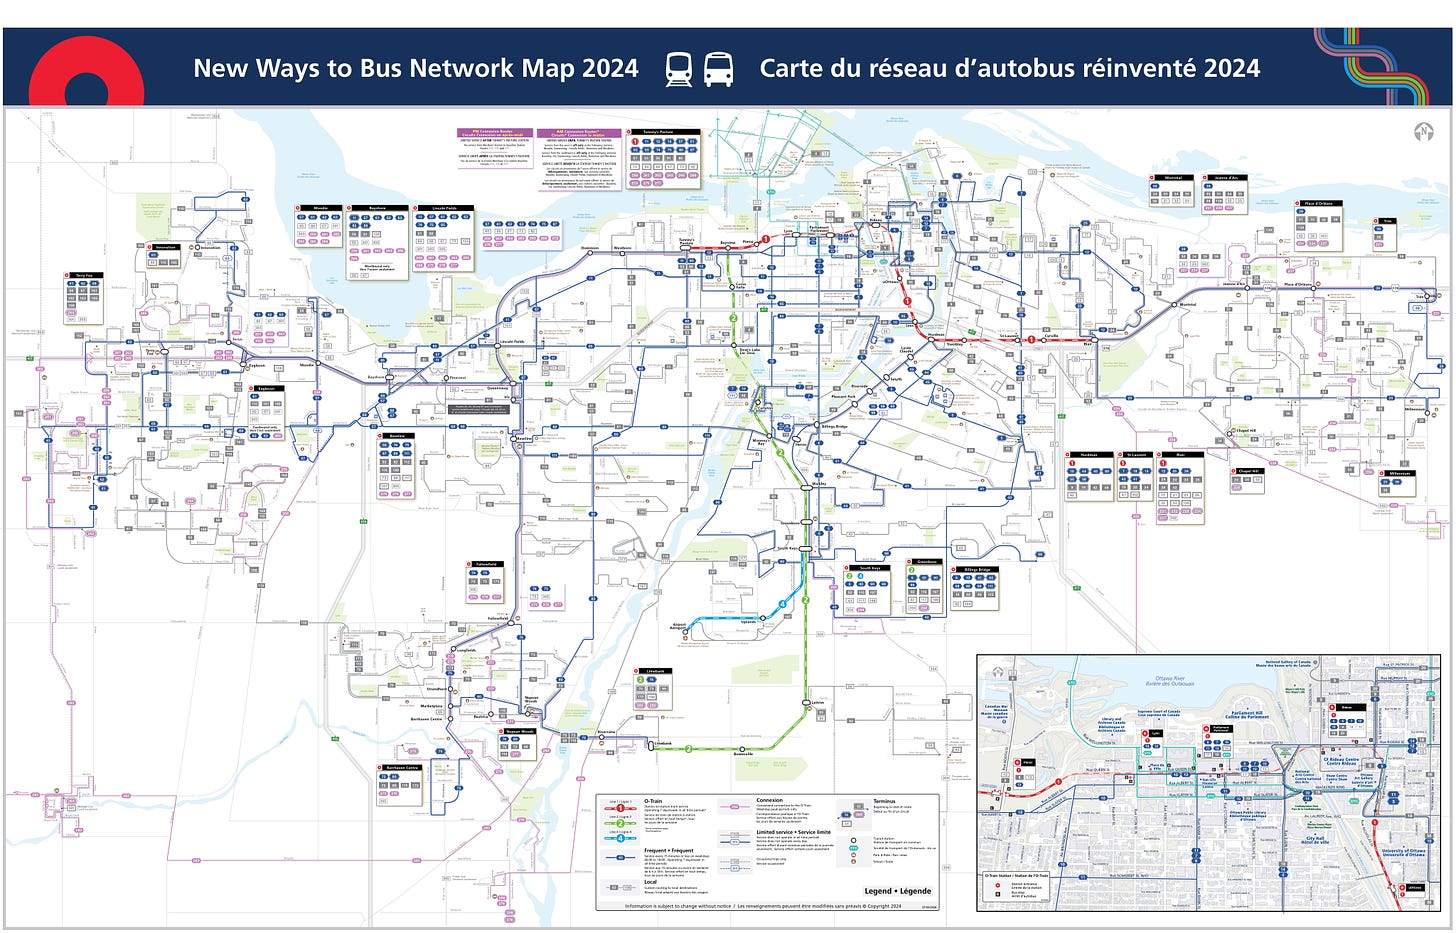 New Ways to Bus Network Map 2024